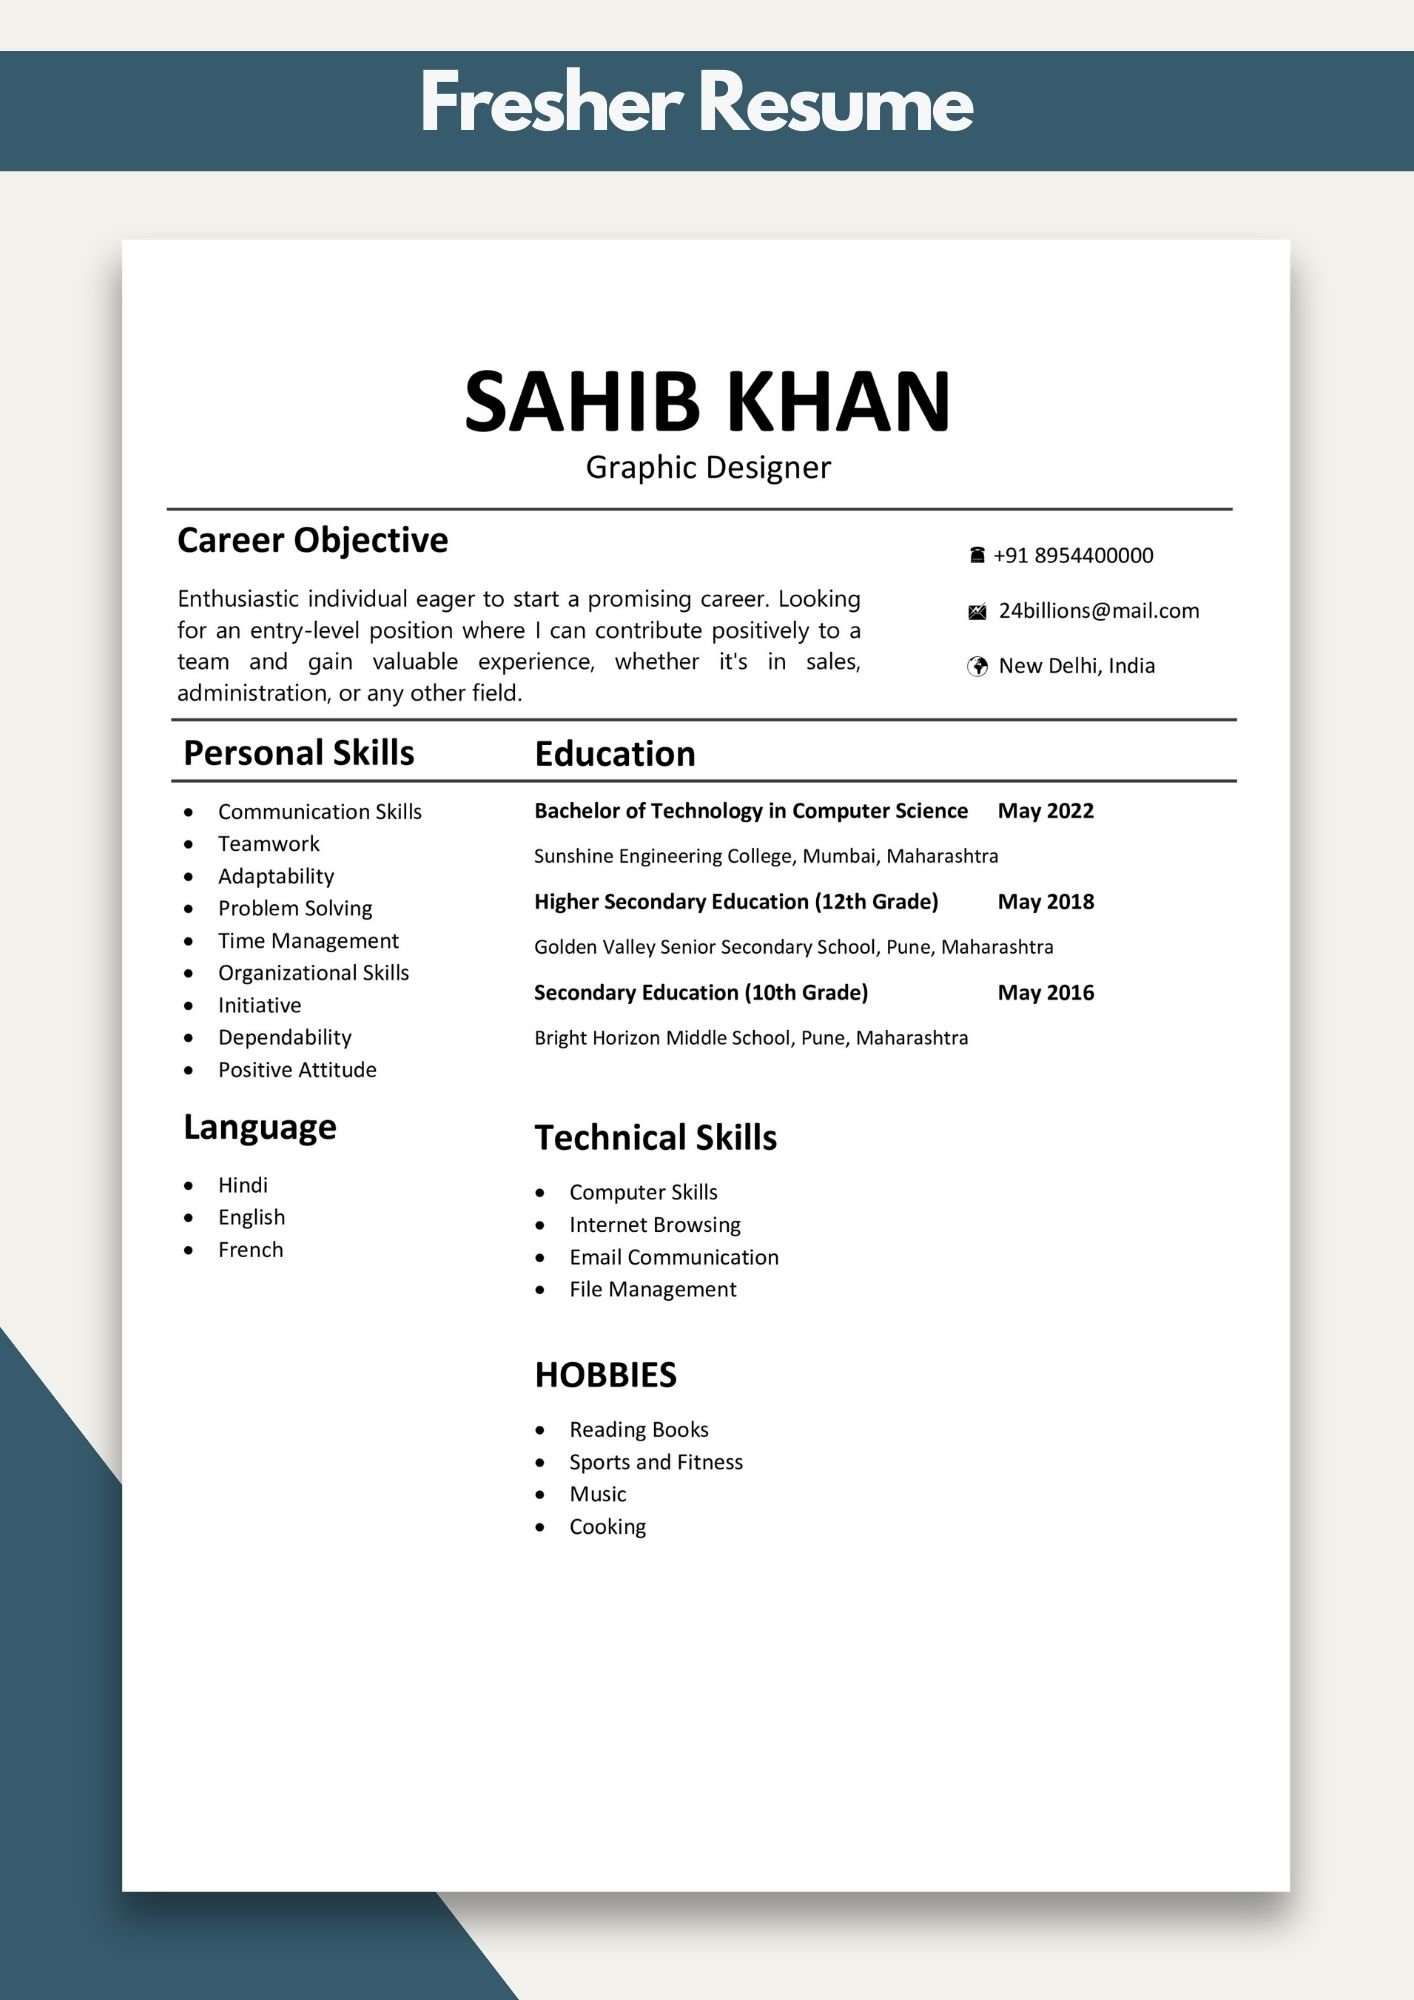 Freshers Resume Format Pdf and Word File